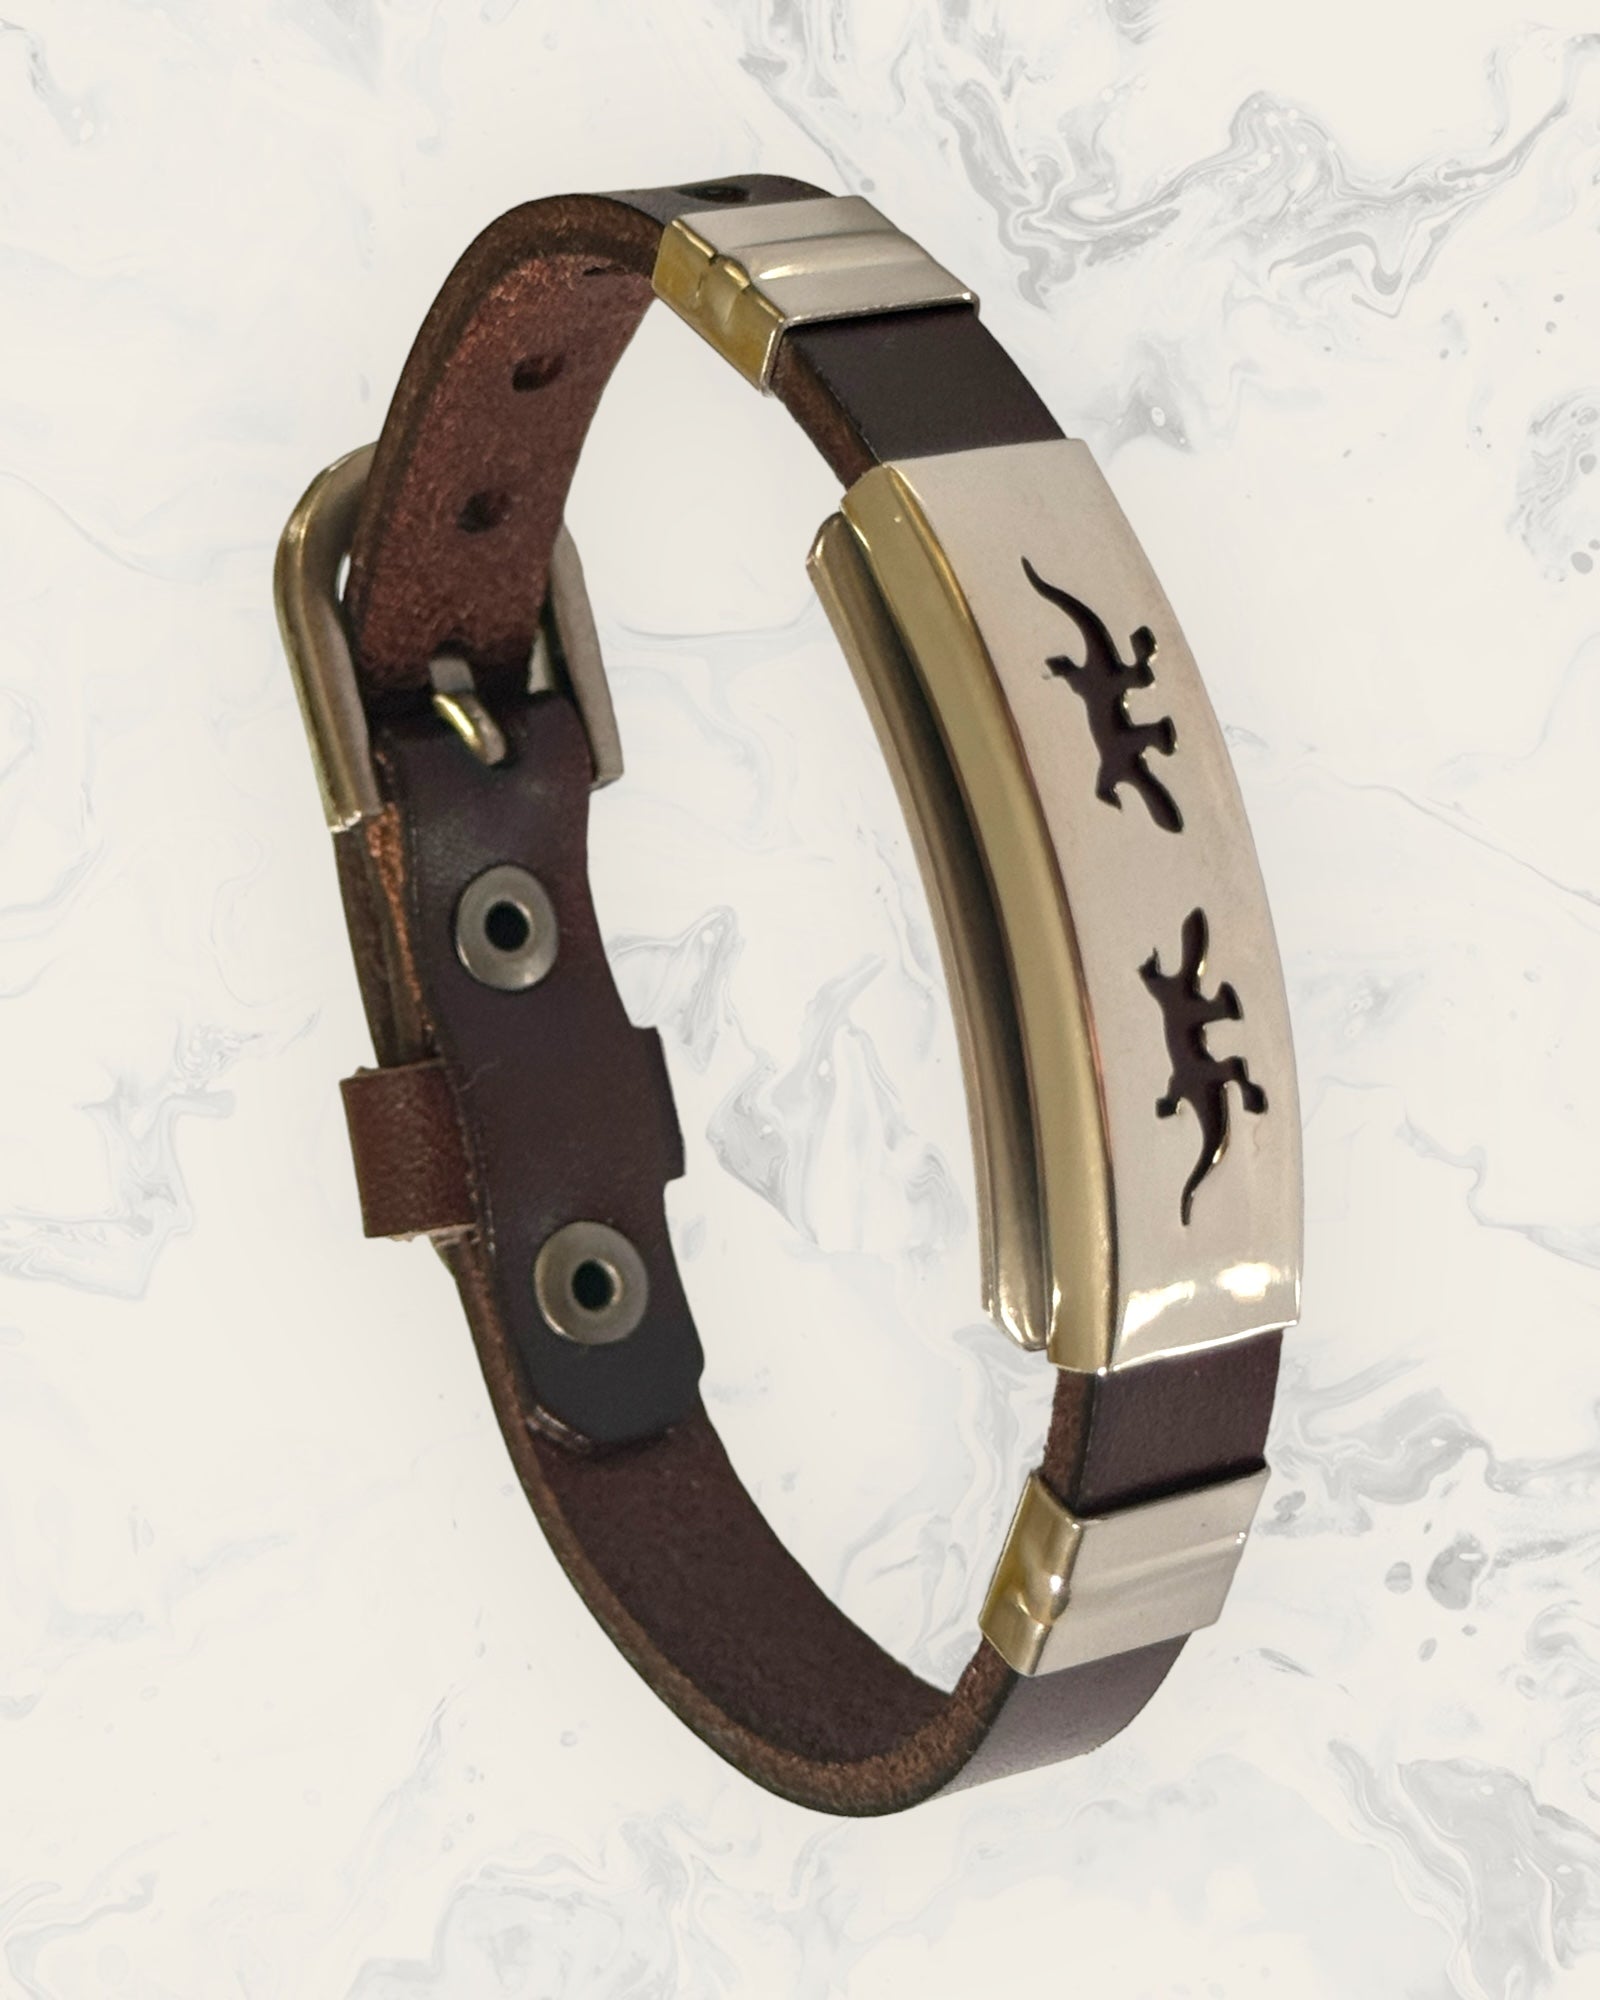 Frequency Jewelry Natural Pain Relief and EMF Protection Bracelet Leather Band Color Dark Brown with Two Geckos design on a silver metal slider